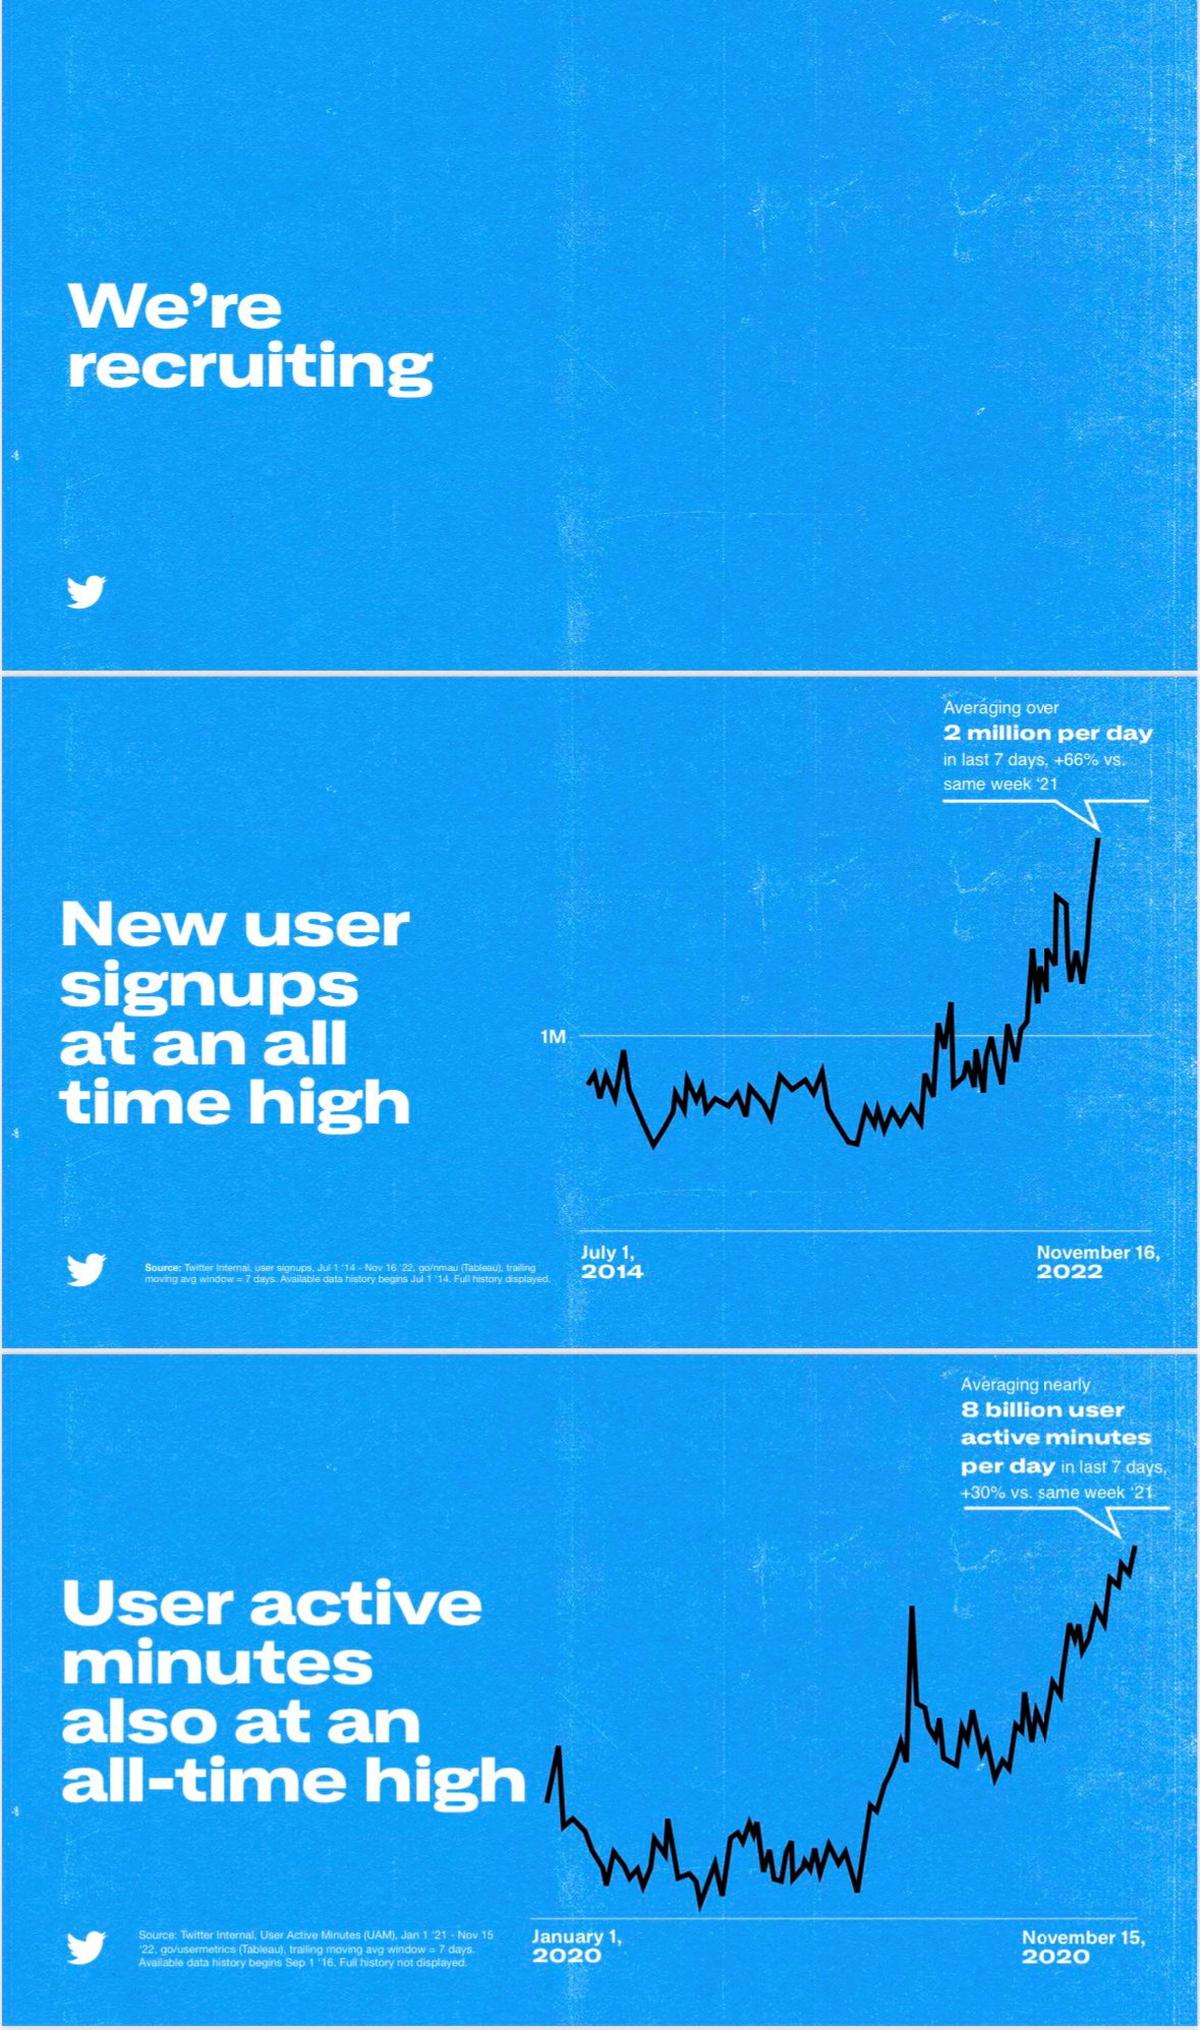 Twitter user signups at all-time high; 66% more than last year, says CEO Musk